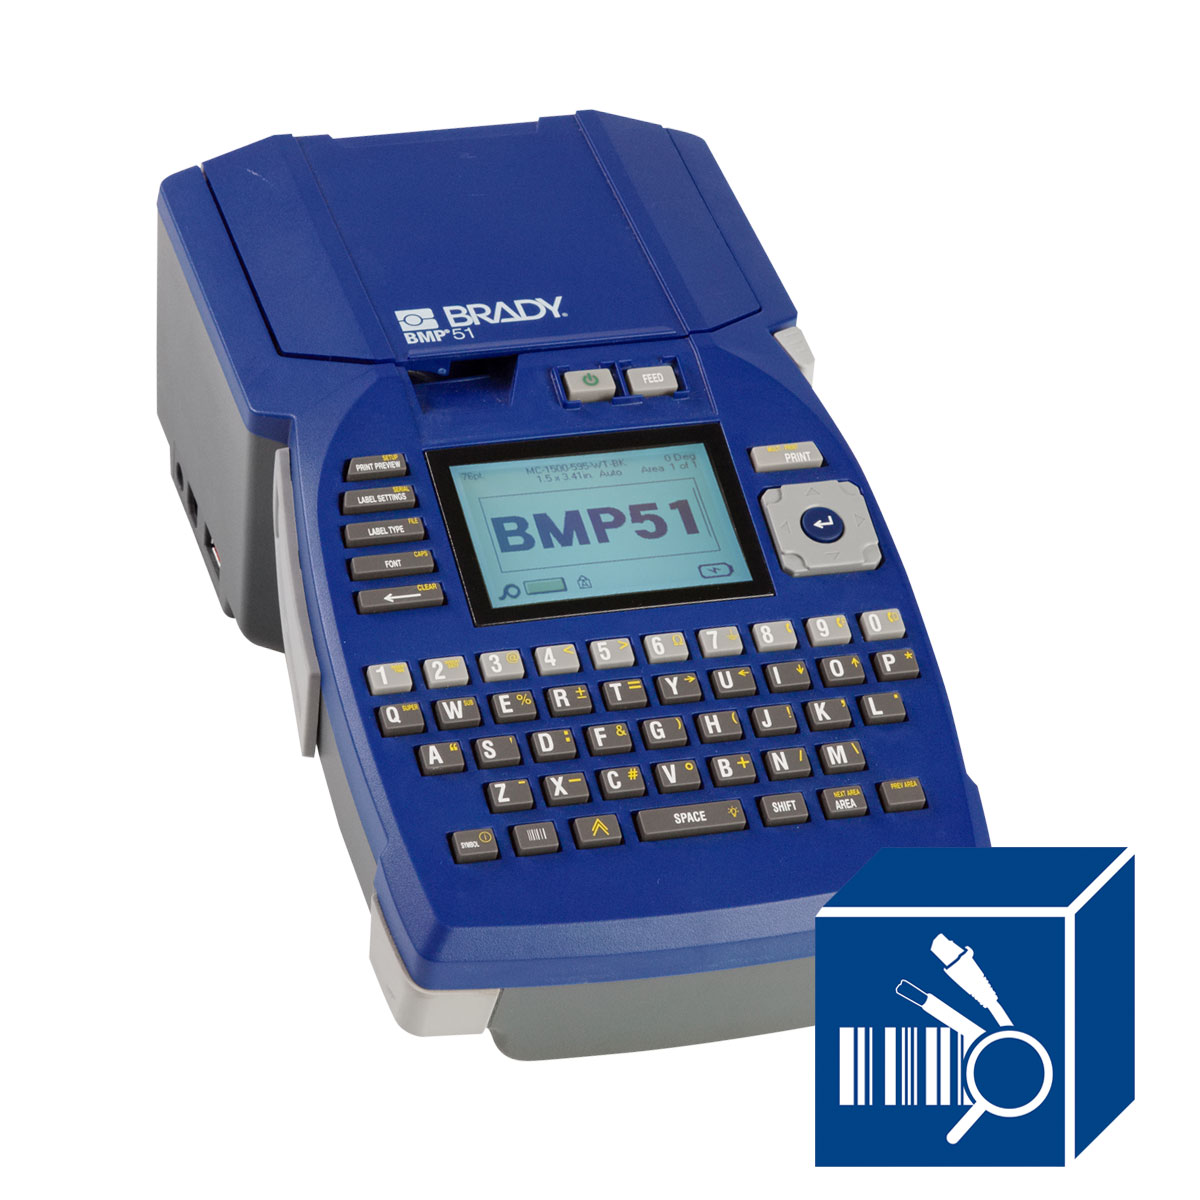 and BMP53 Label Makers and BMP53 Label Makers Translucent Tape 1 Height.375 Width BMP51 Brady Self-Laminating Vinyl Label Tape M-48-427 Black on White M-48-427 1 Height.375 Width Compatible with BMP41 